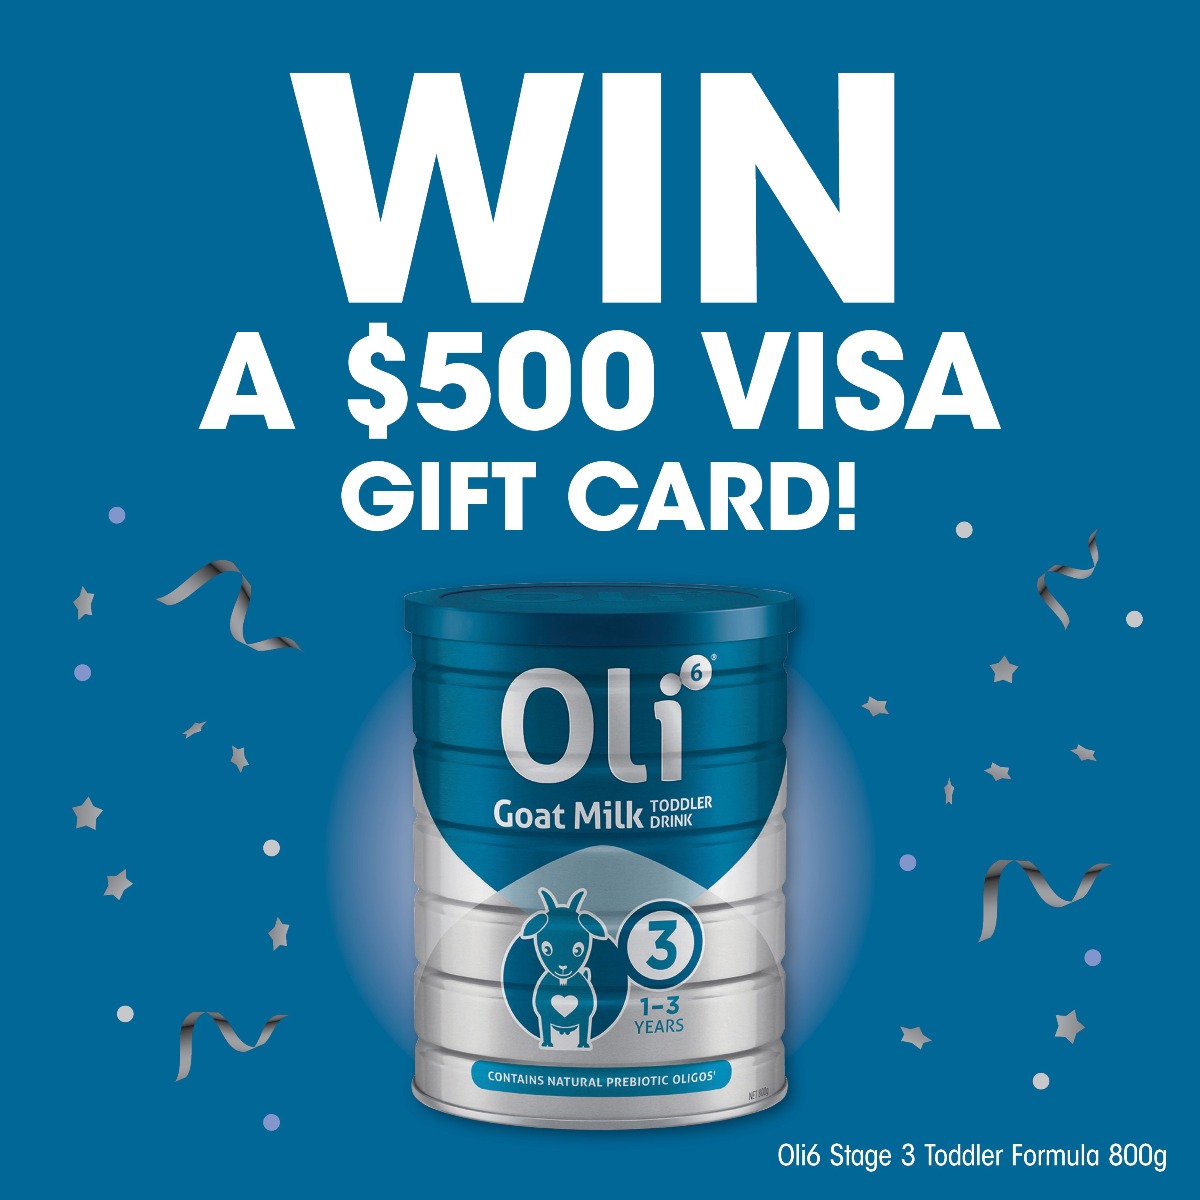 Good Price - Win a $500 Visa Gift Card with Oli6 Stage 3 Toddler!